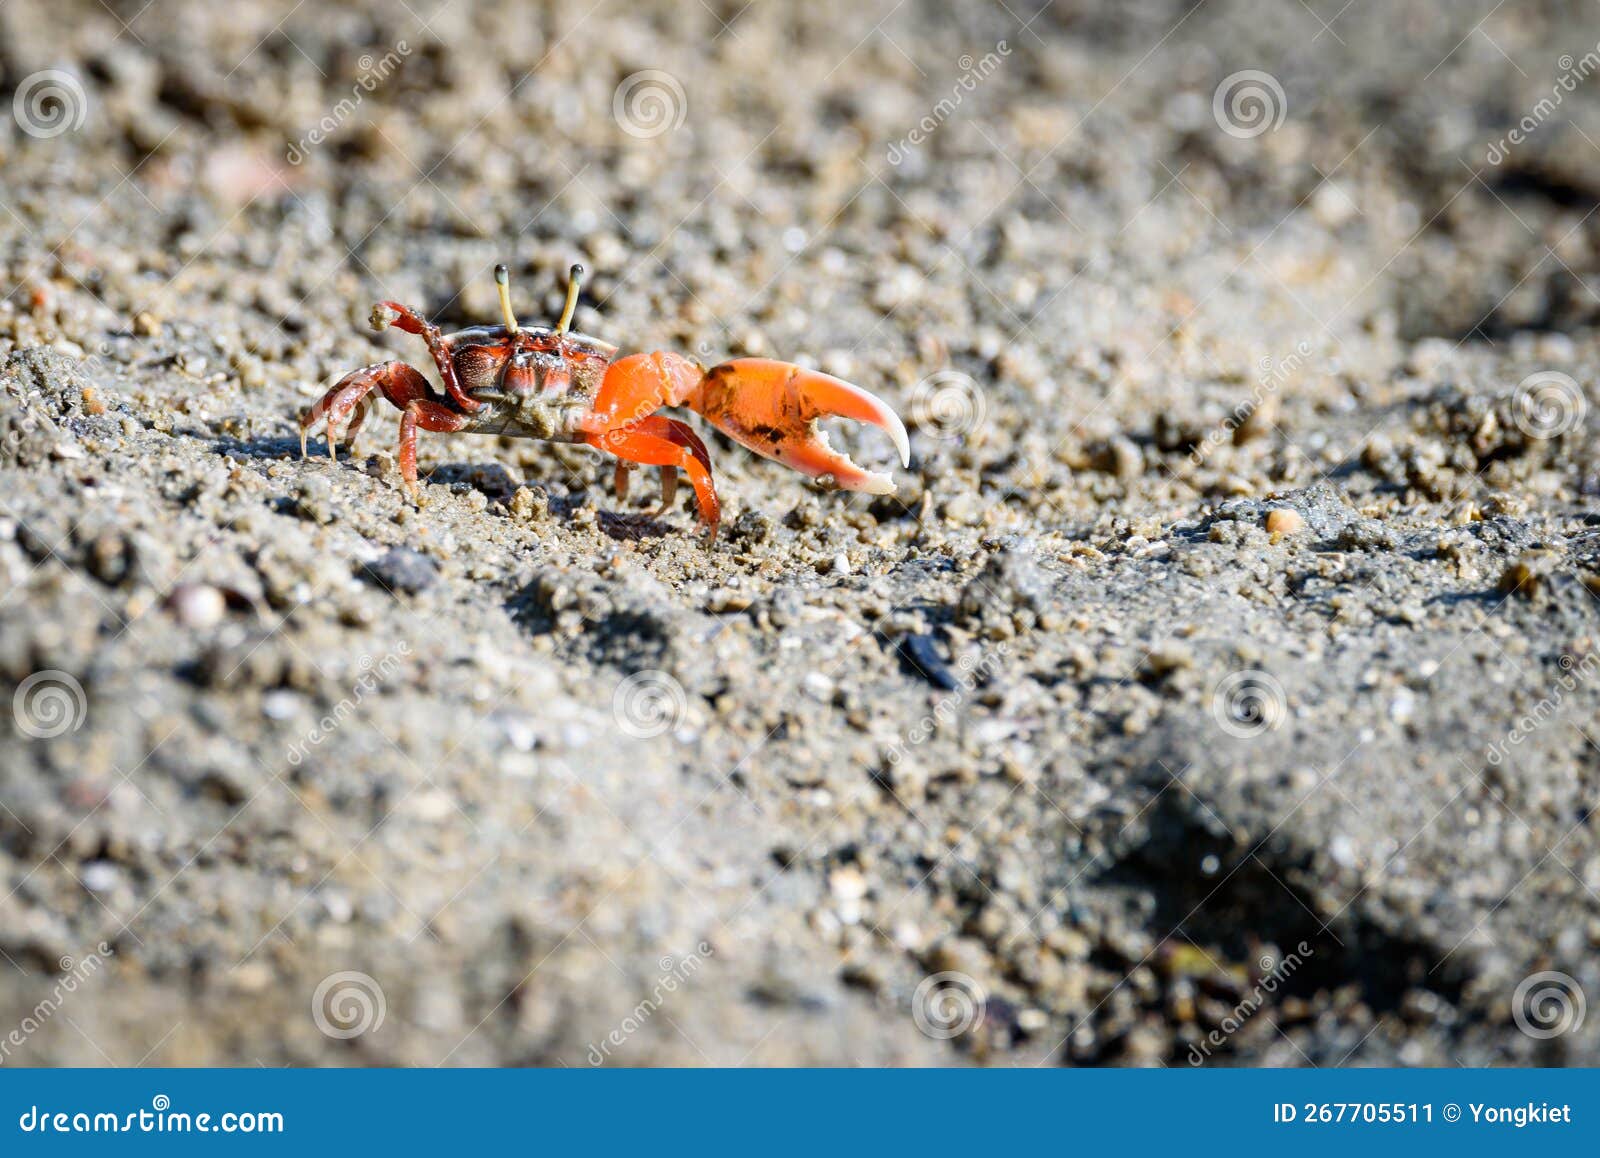 Fiddler Crabs, Small Male Sea Crab is Eating Food Stock Image - Image of  fiddler, crab: 267705511